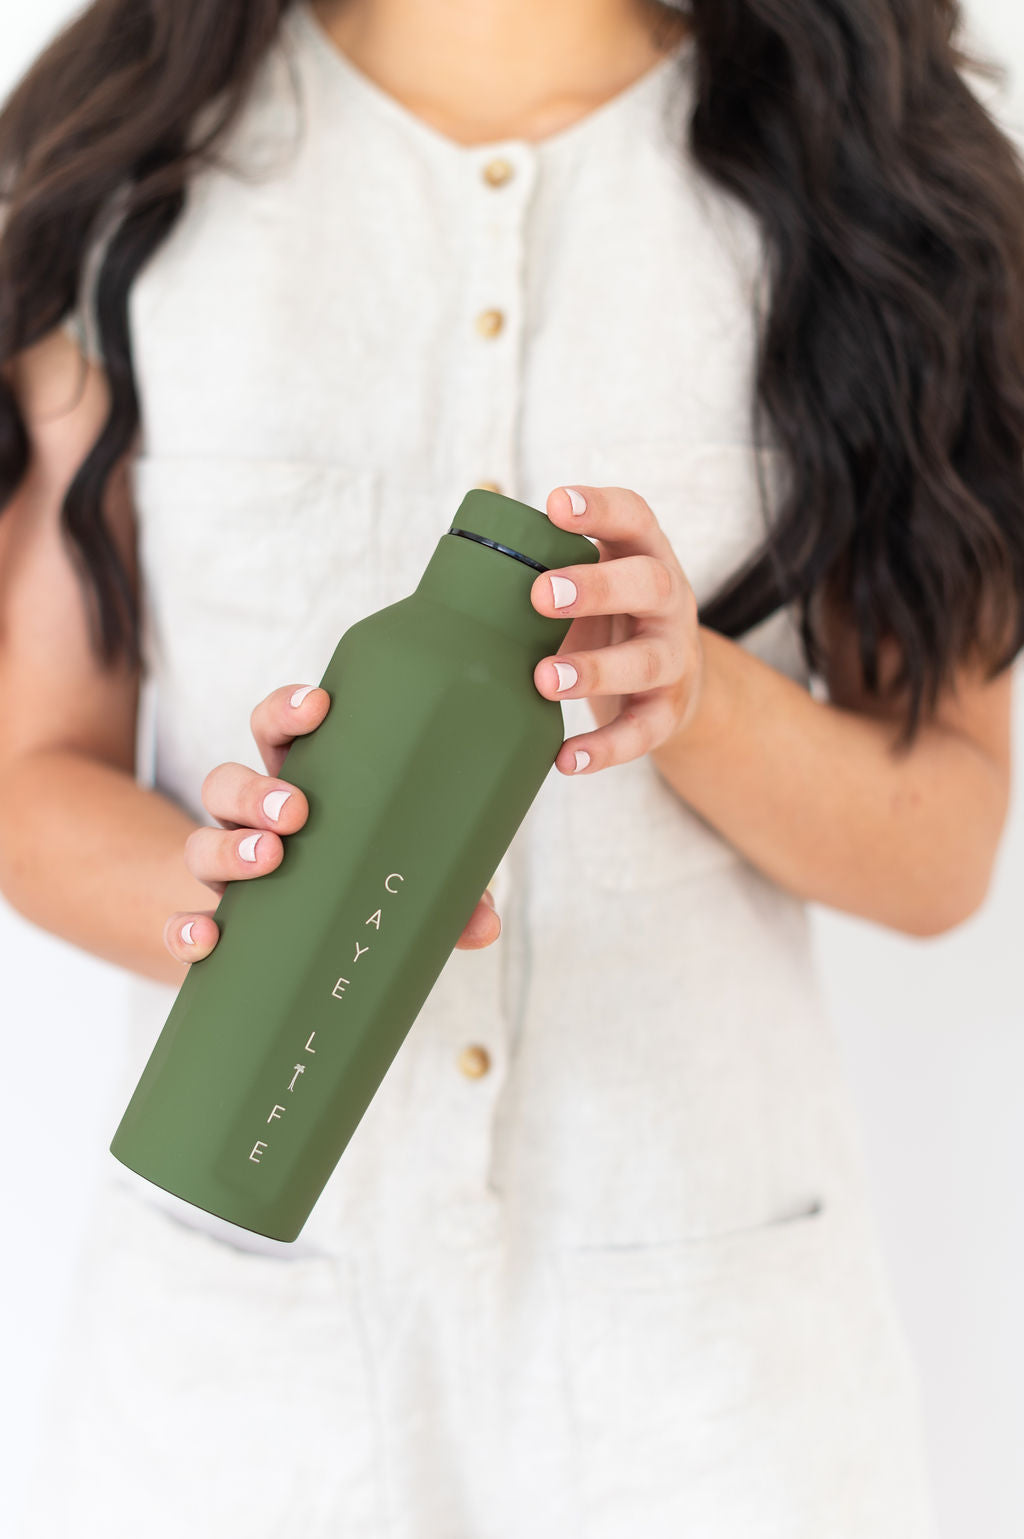 *JUST LAUNCHED* Galapagos | 500ml Water Bottle | Green - Caye Life